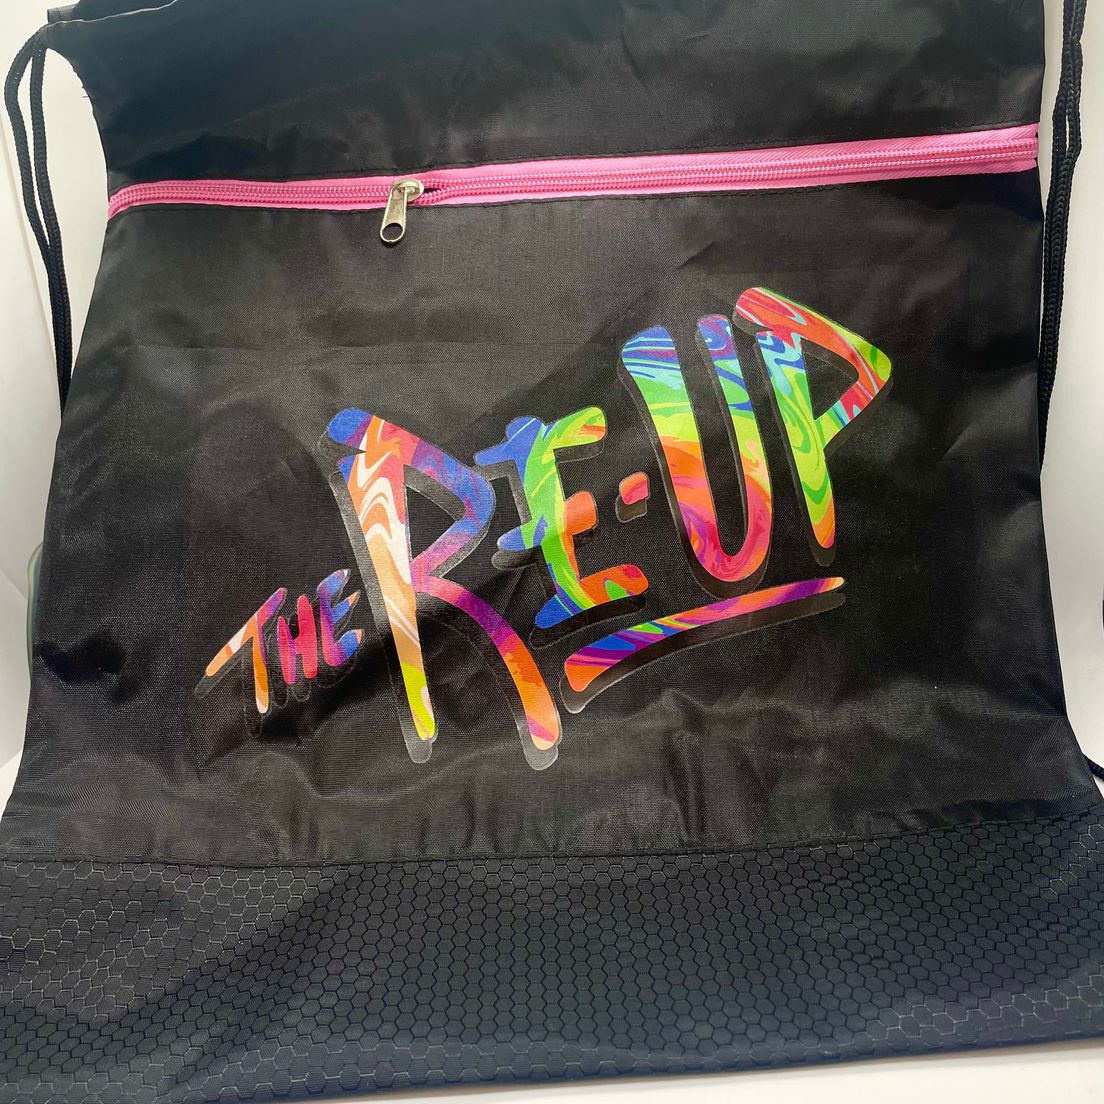 Deal! $15 Gym Sack - The Re-Up (House Picks--Colors will Vary) + Preroll